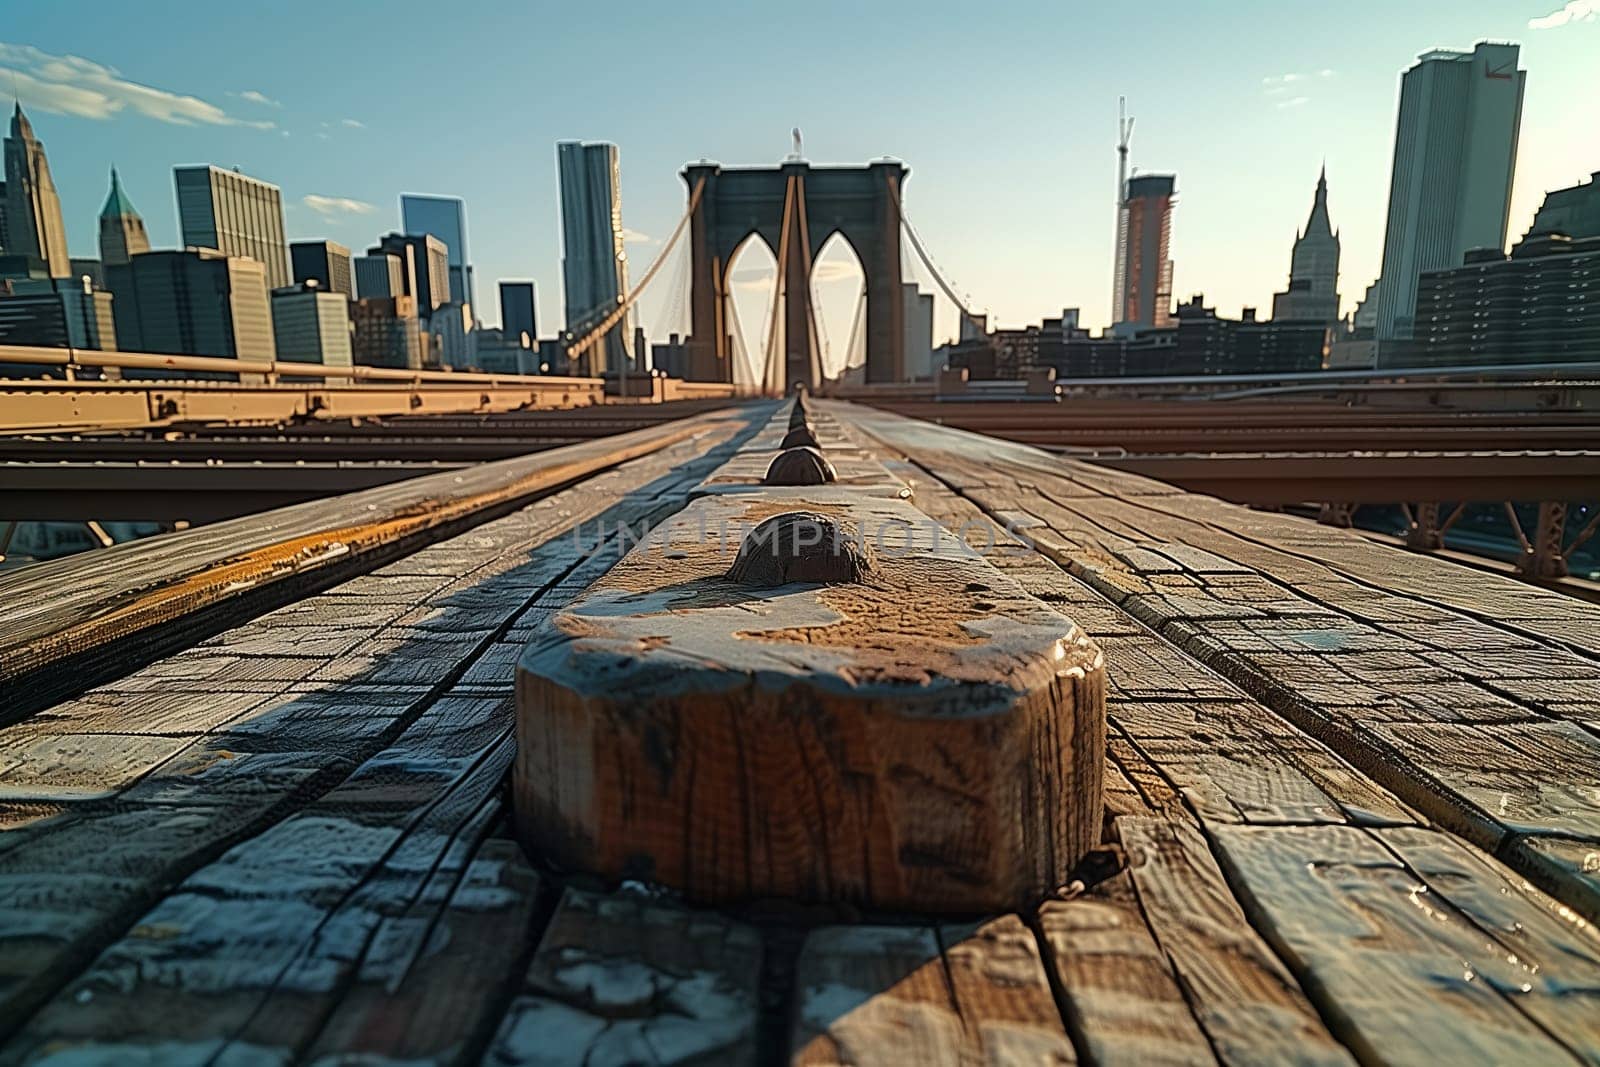 A wooden railway track bridge with a city skyline on the horizon creates a picturesque landscape for travelers passing through the city